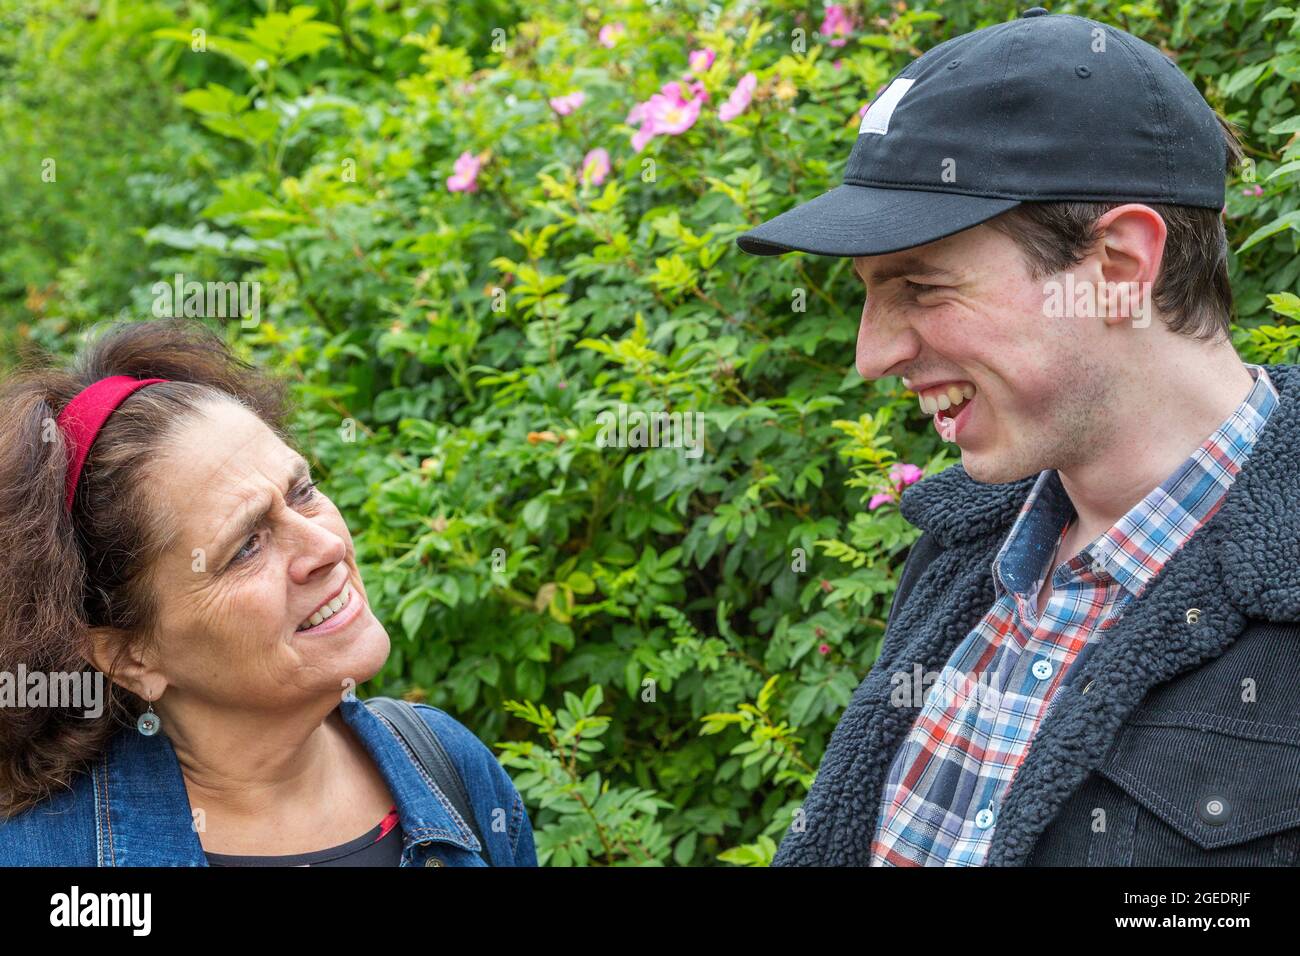 A middle aged woman looks confused as a yoinger man pulls a face and laughs. Stock Photo